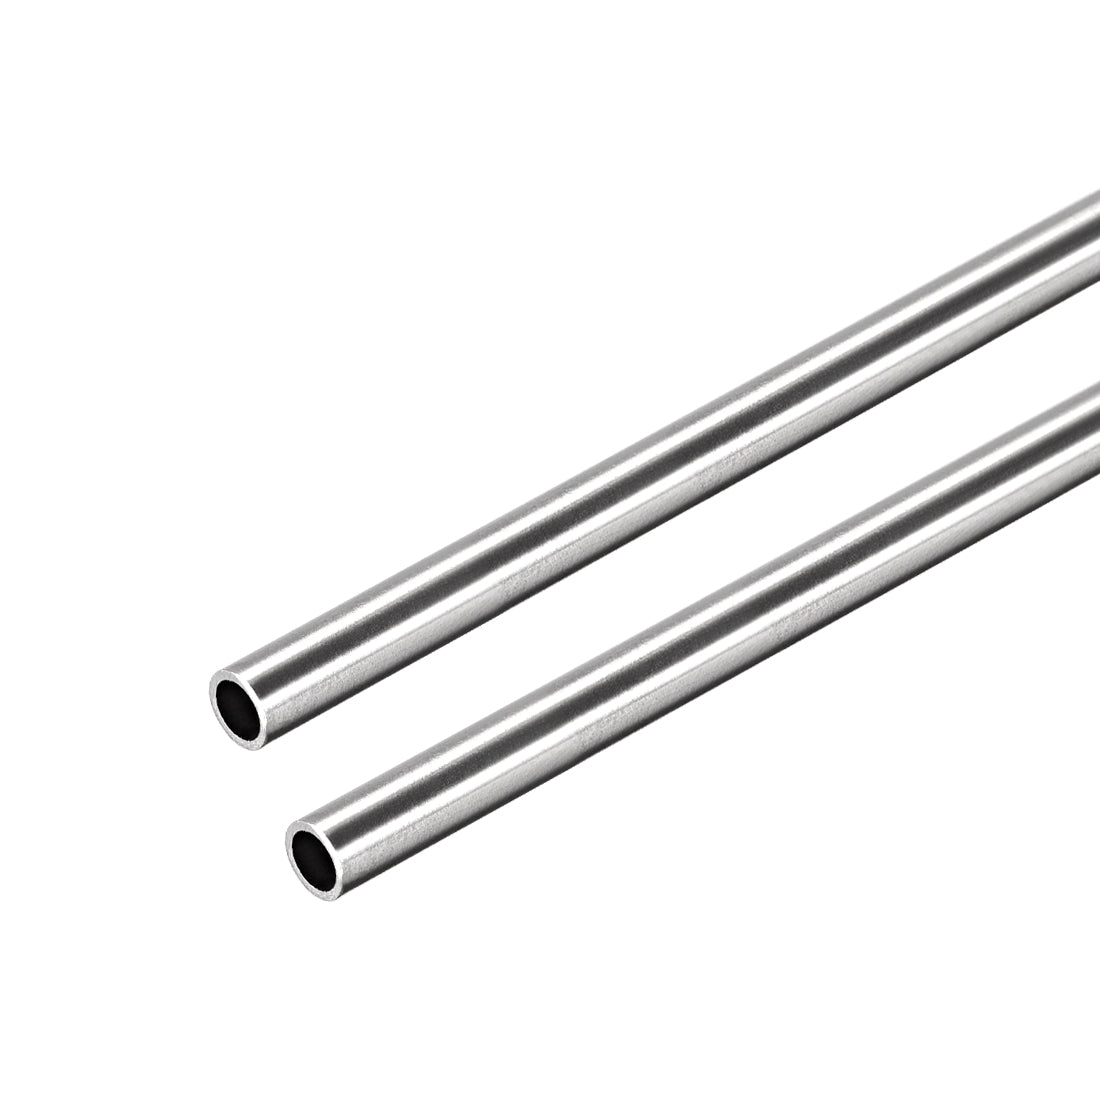 Uxcell Uxcell 304 Stainless Steel Round Tubing 5mm OD 1mm Wall Thickness 250mm Length Seamless Straight Pipe Tube 2 Pcs